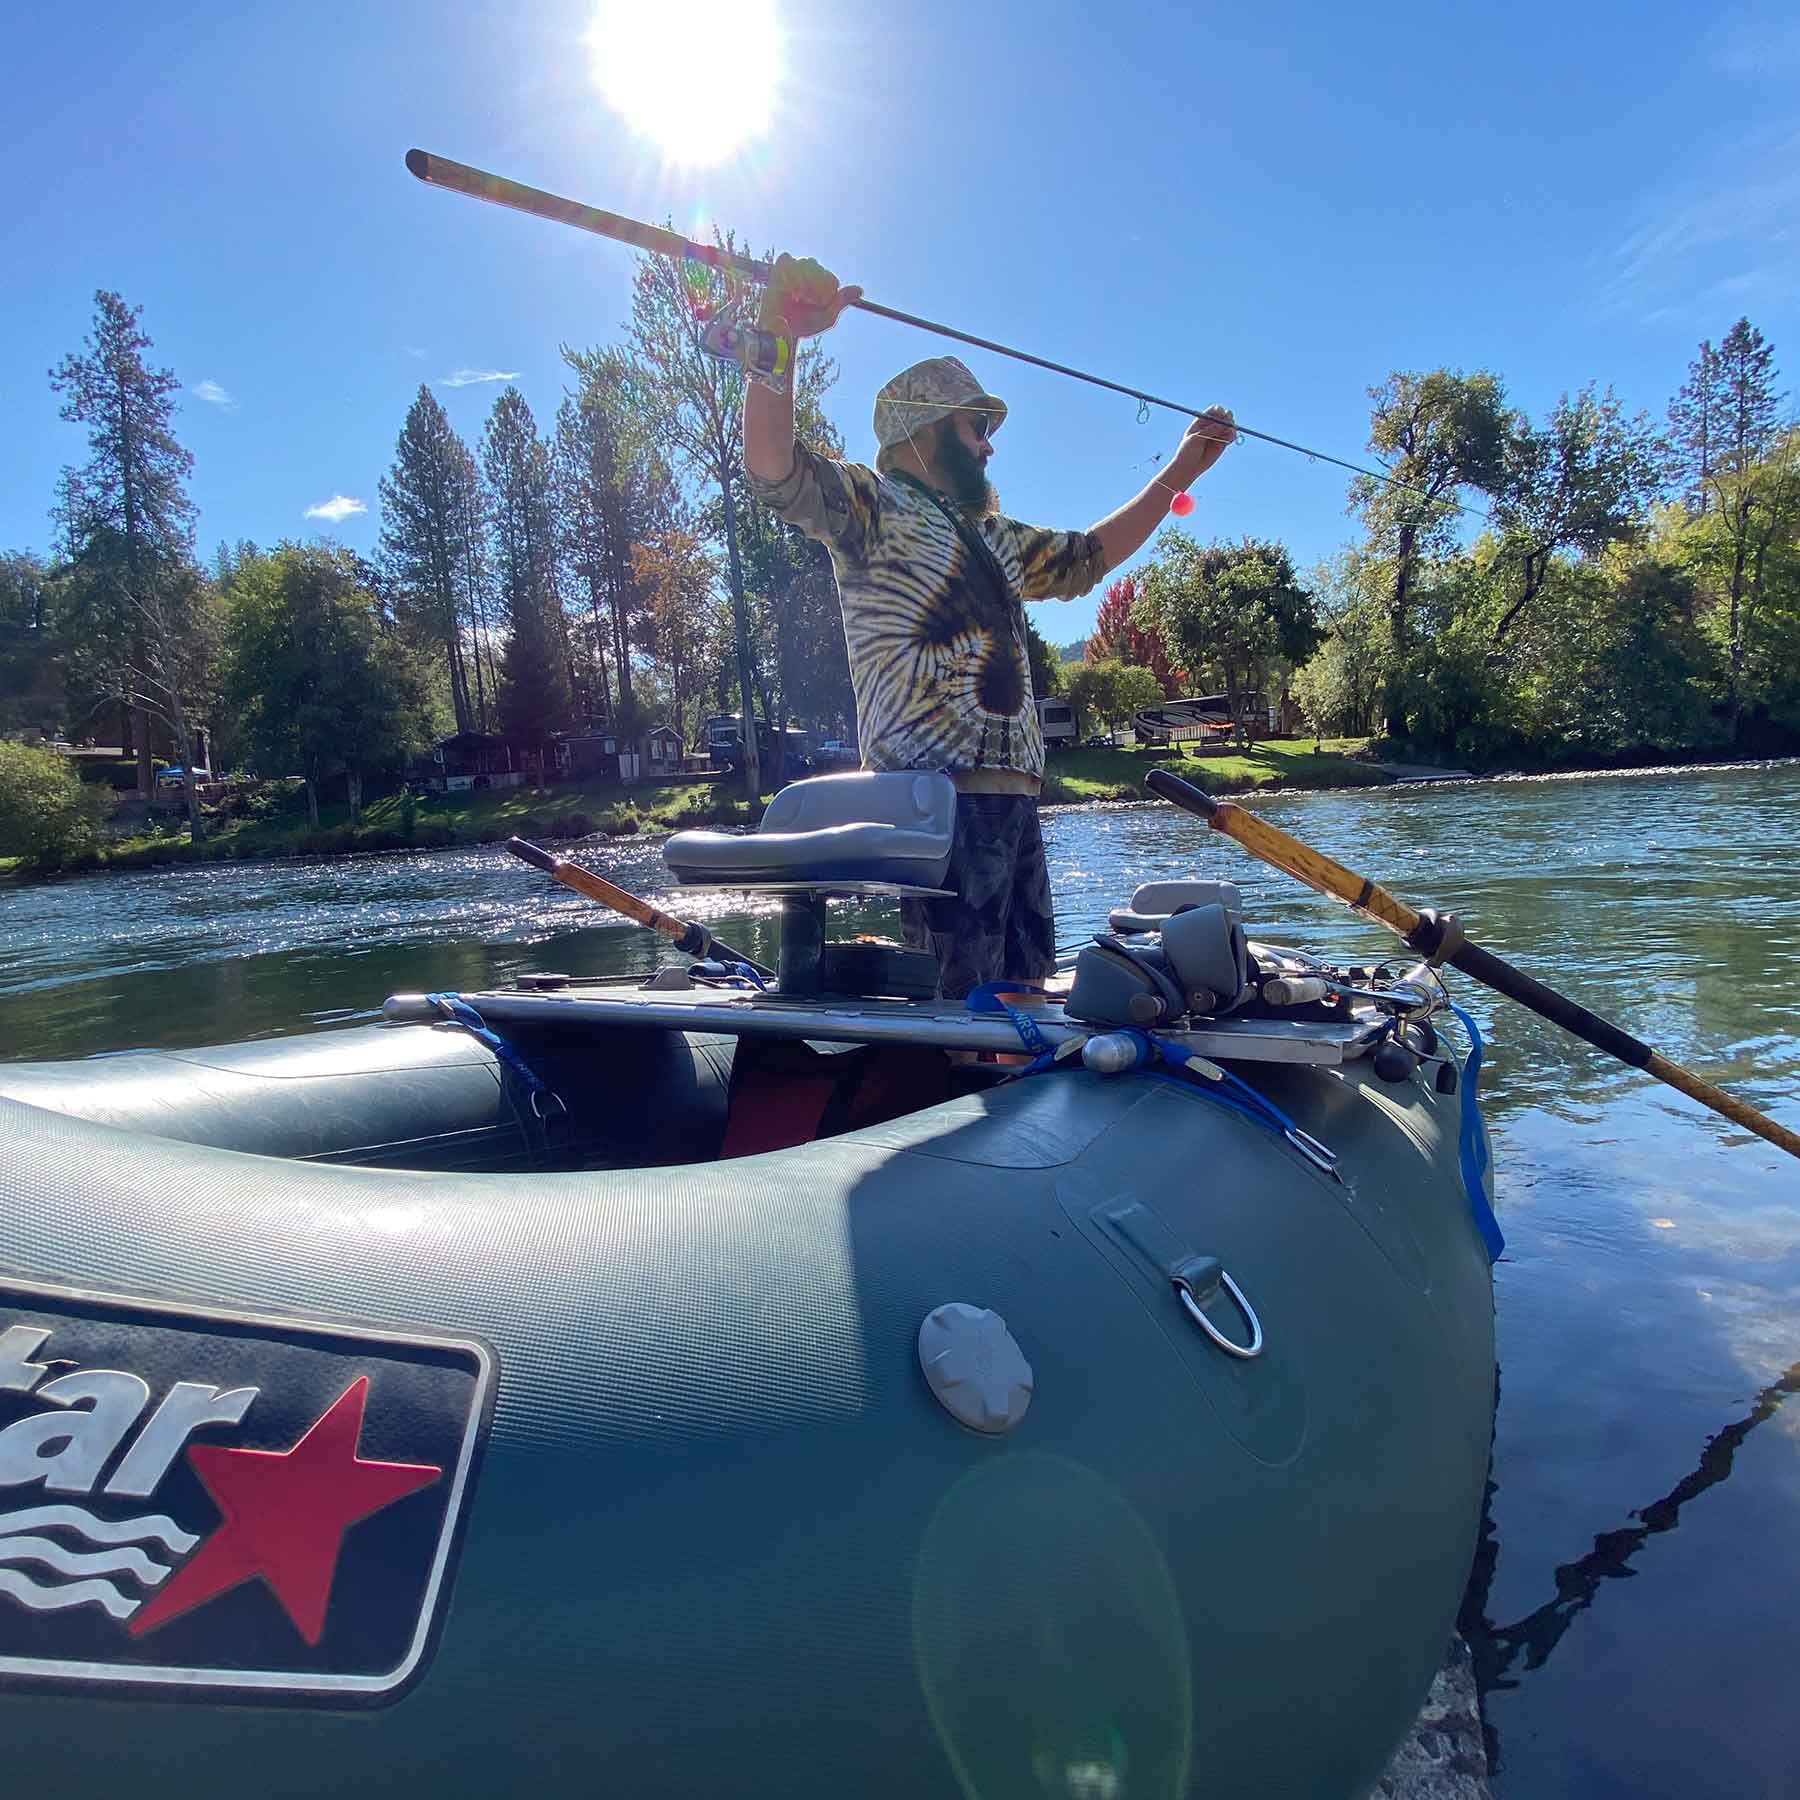 Fishing on the Rogue River